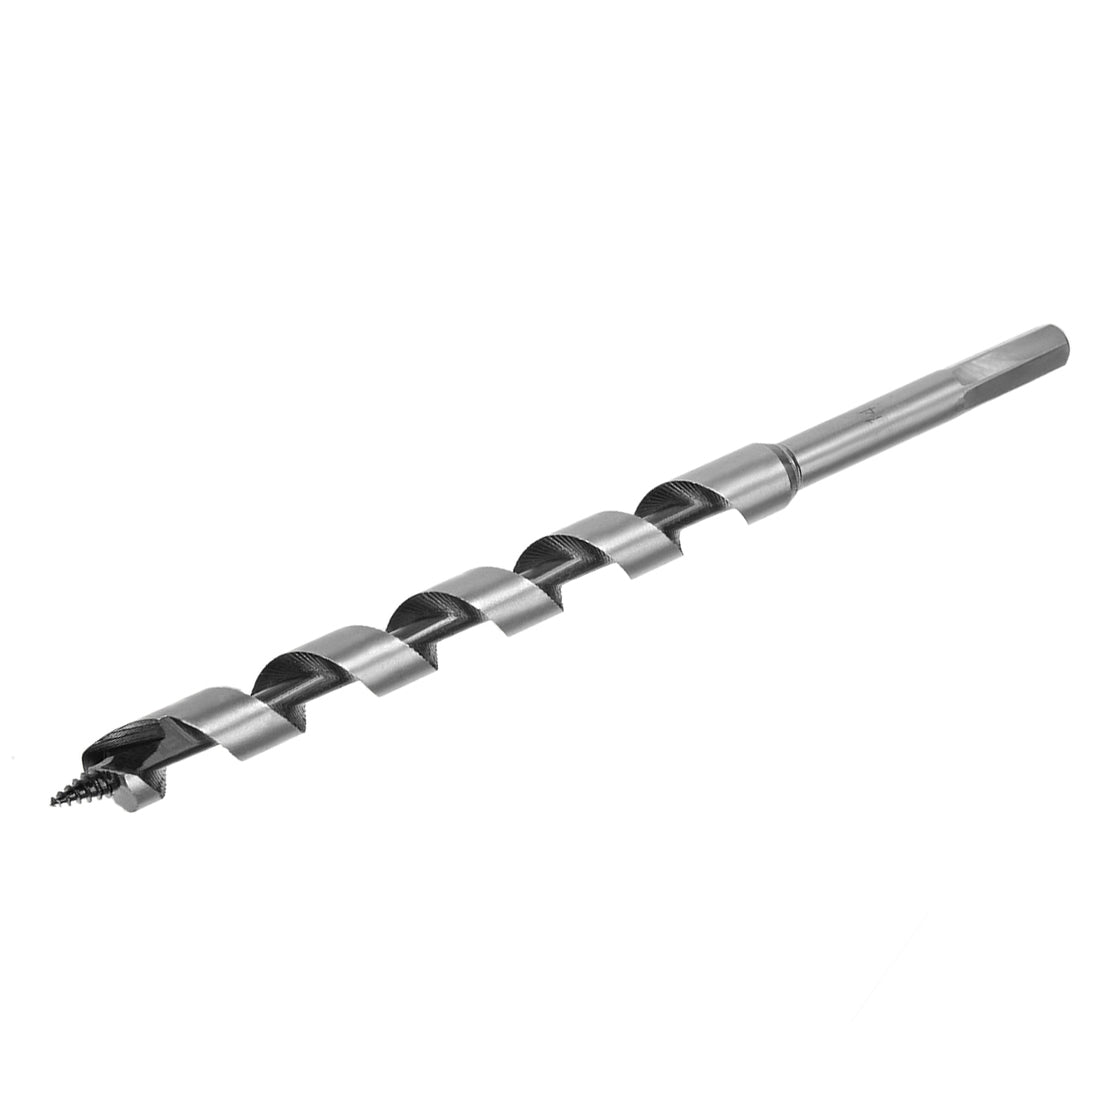 uxcell Uxcell Auger Drill Bit Wood Hex Shank 14mm Cutting Dia High Carbon Steel for Electric Bench Drill Woodworking Carpentry